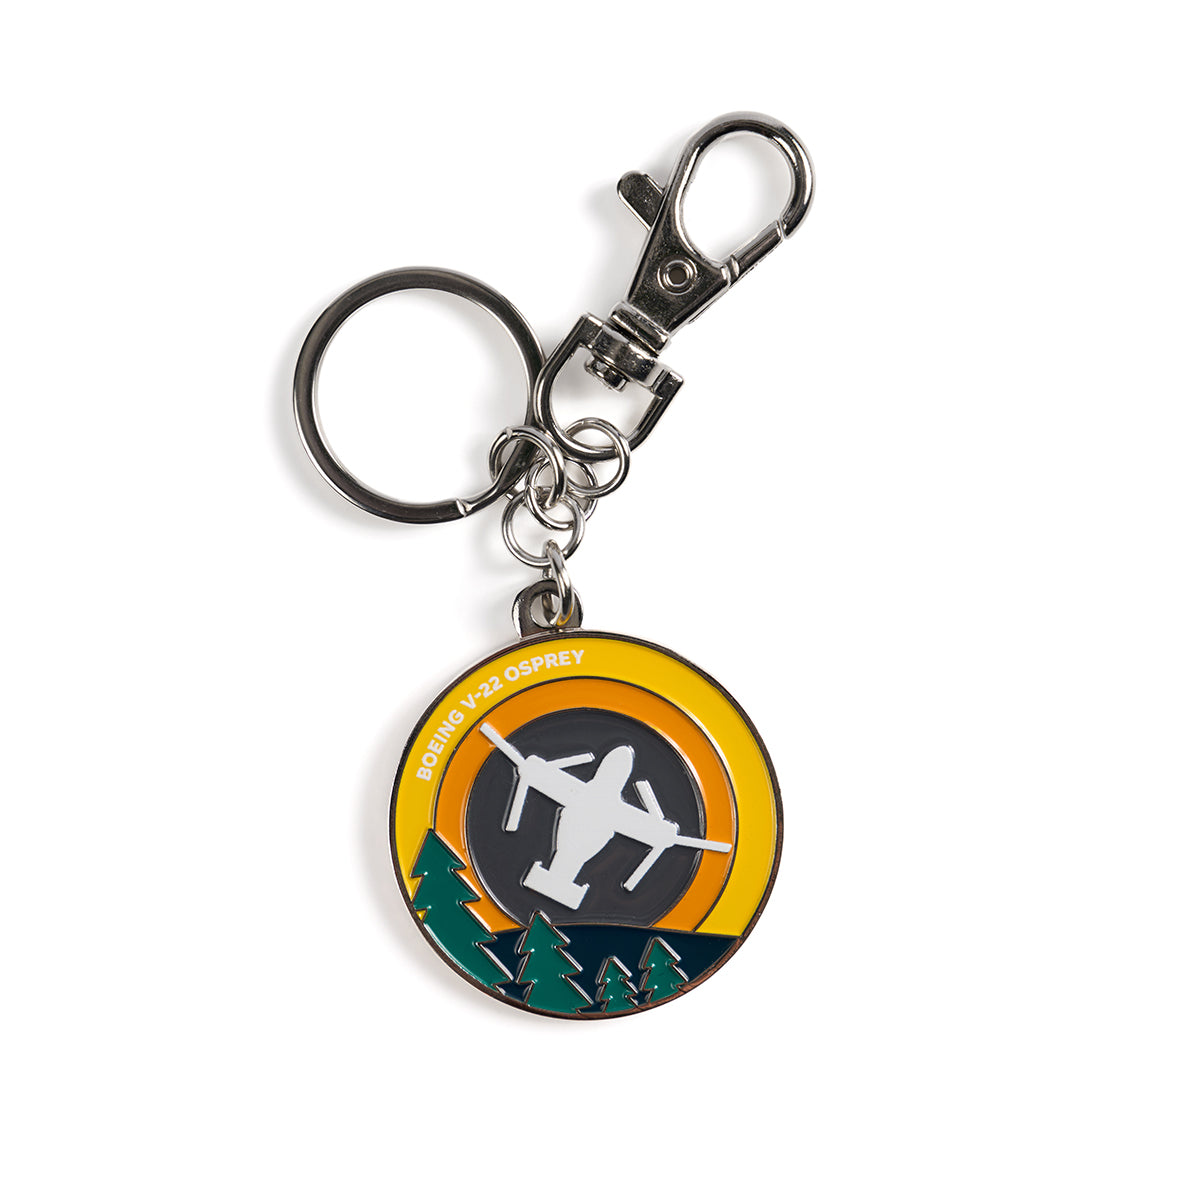 Skyward keychain, featuring the iconic Boeing V-22 Osprey in a roundel design.